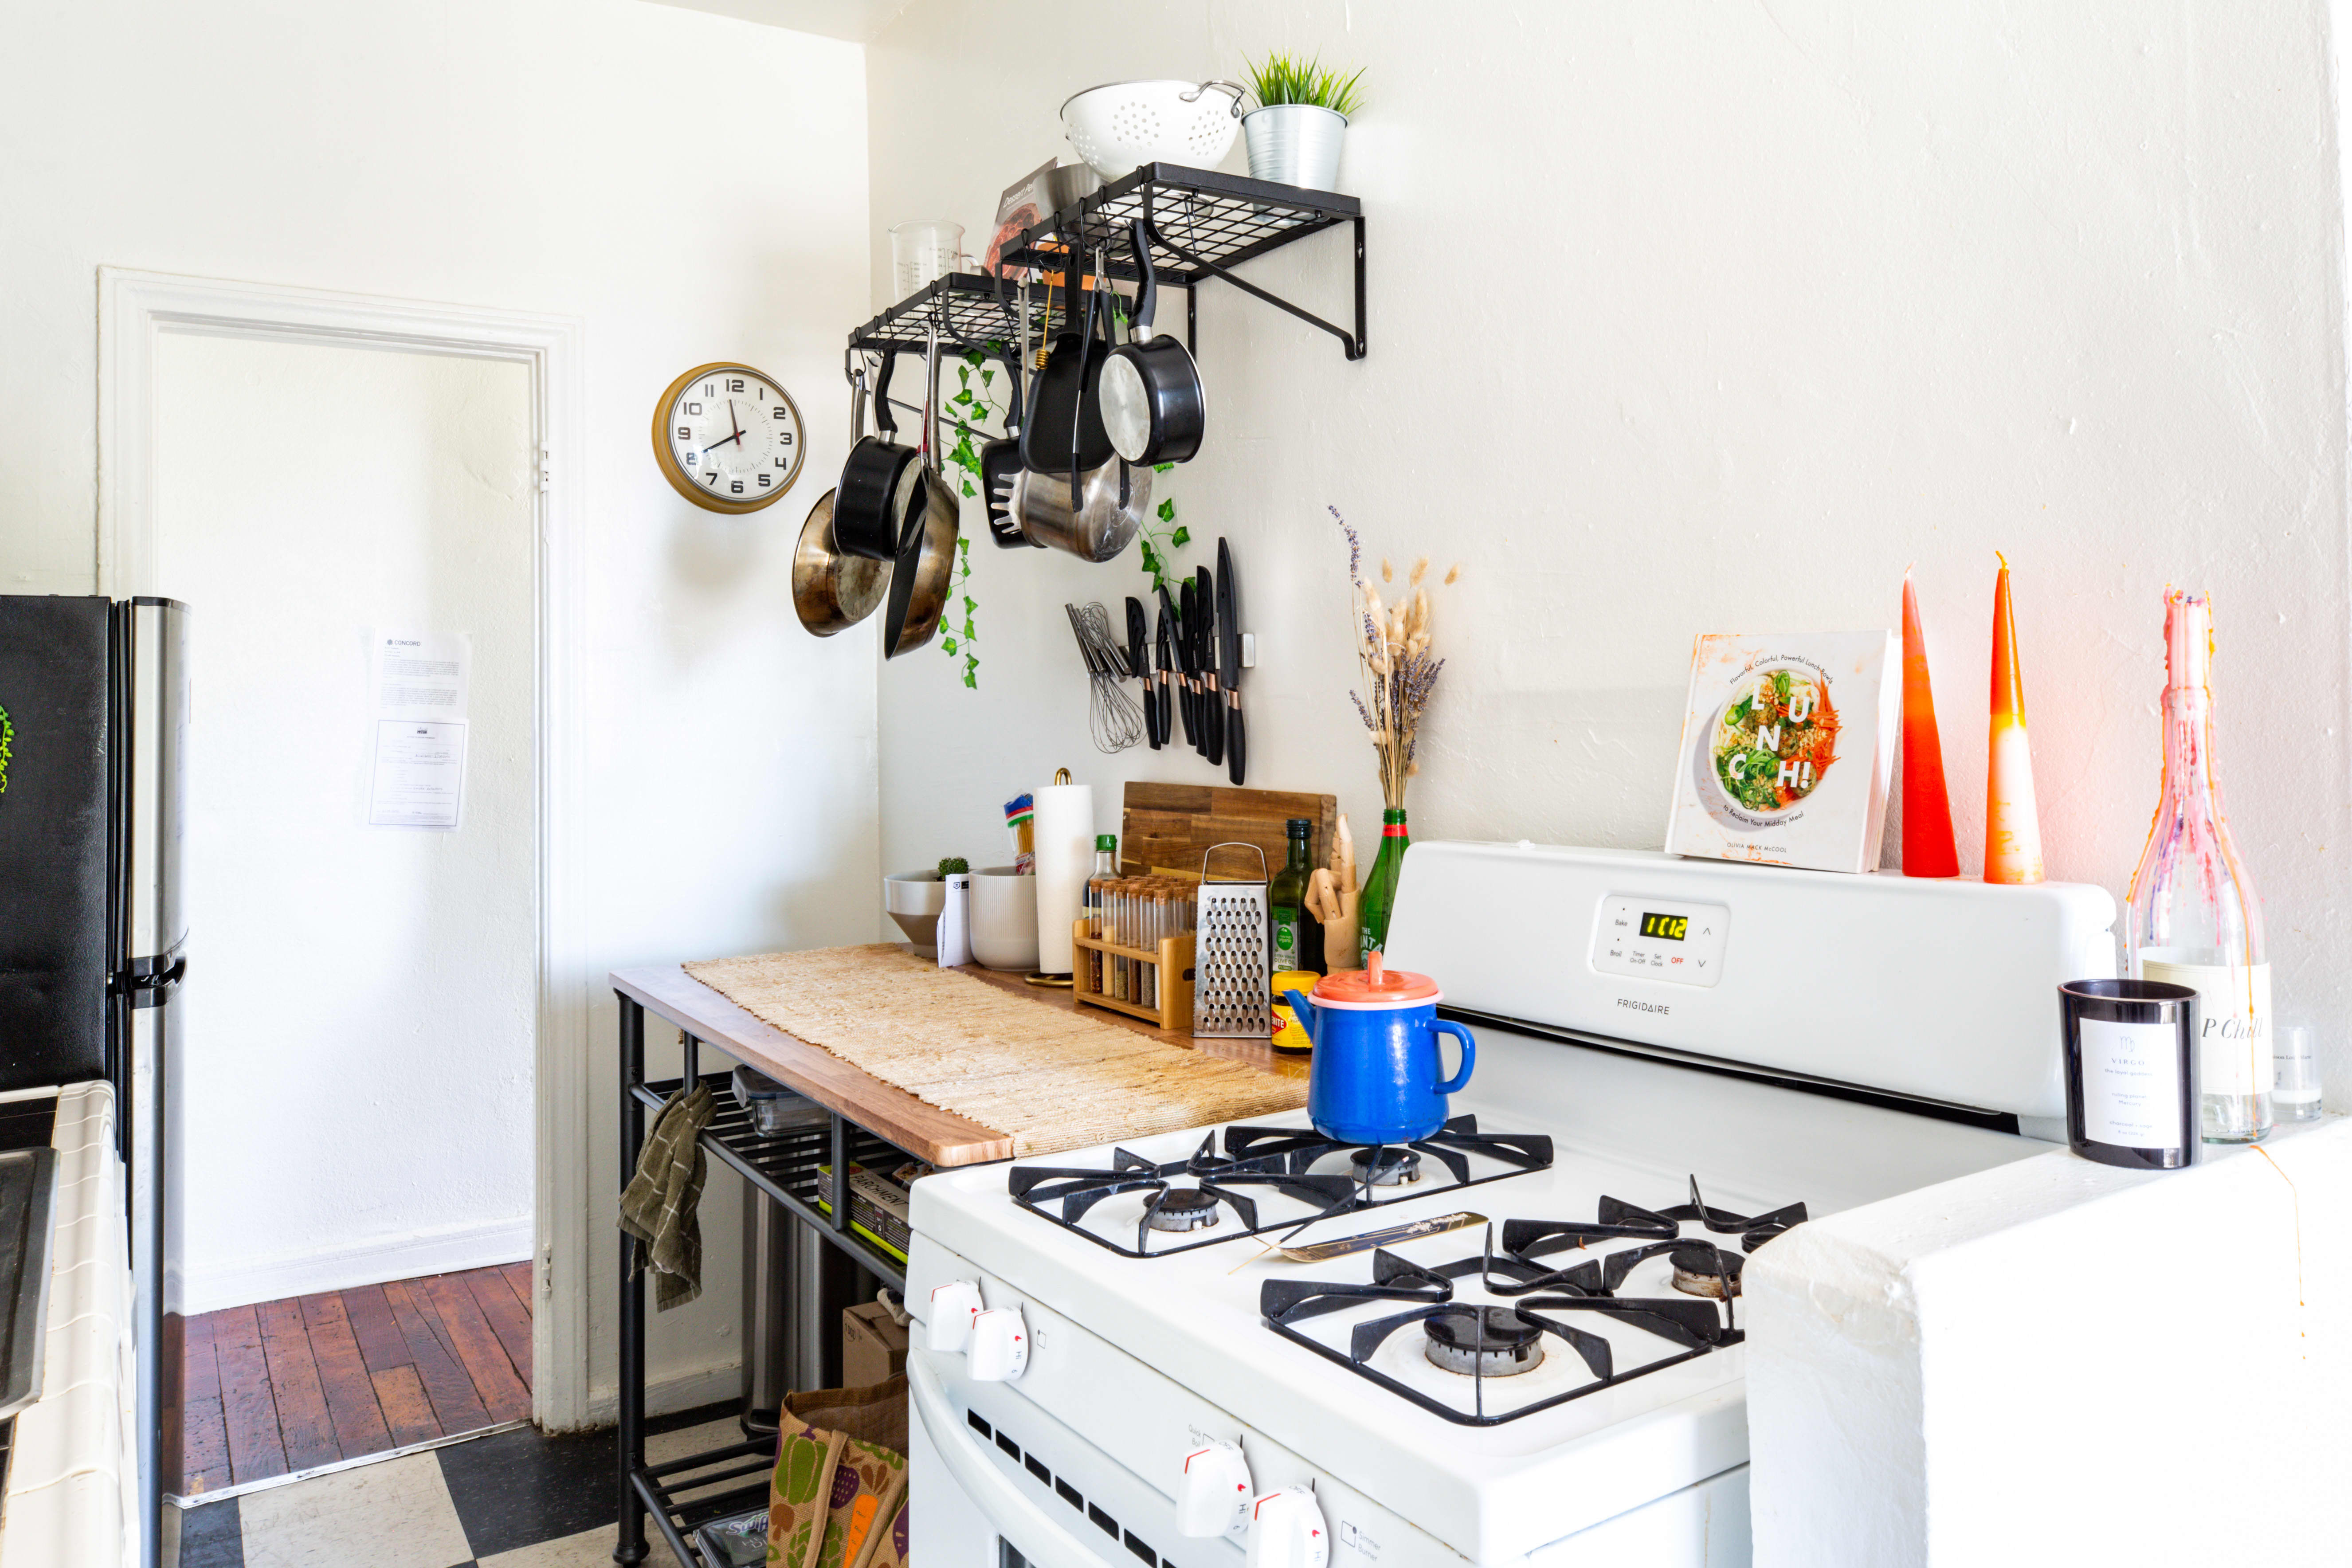 The 6 Best Small Kitchen Gadgets I've Found for My 500-Square-Foot Studio